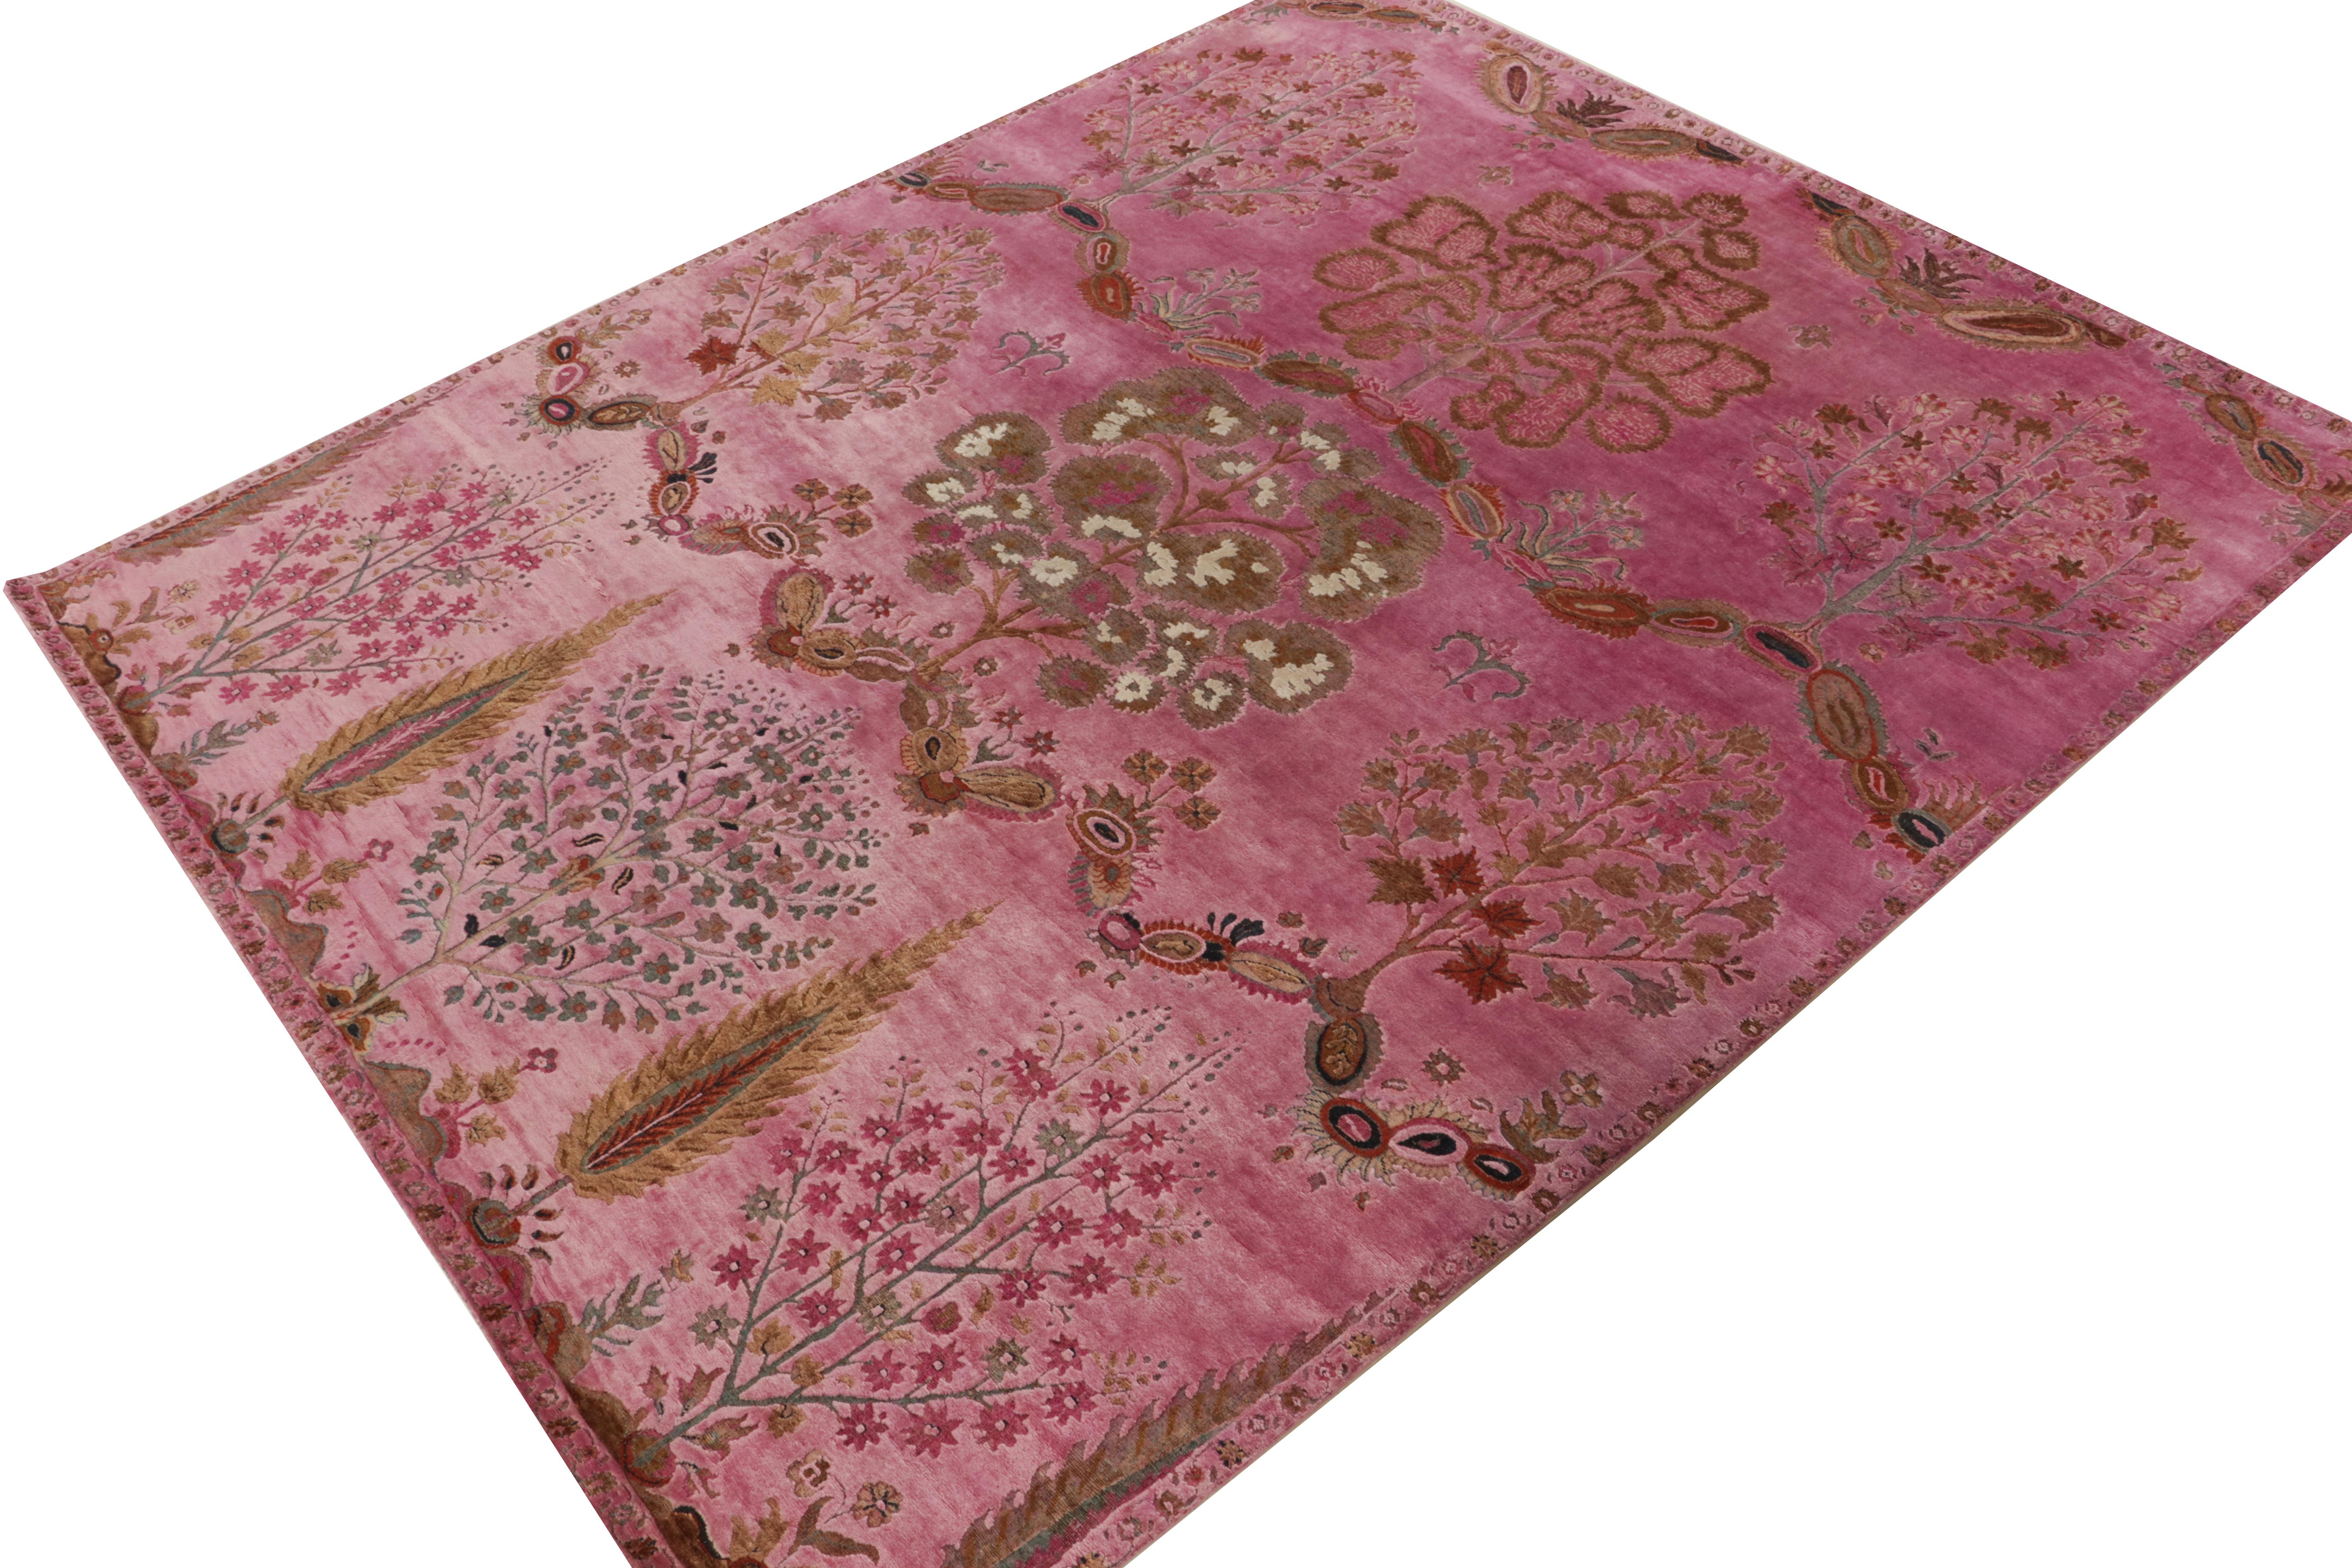 Indian Rug & Kilim’s Classic Style Rug in Pink & Beige-Brown Floral Pattern For Sale